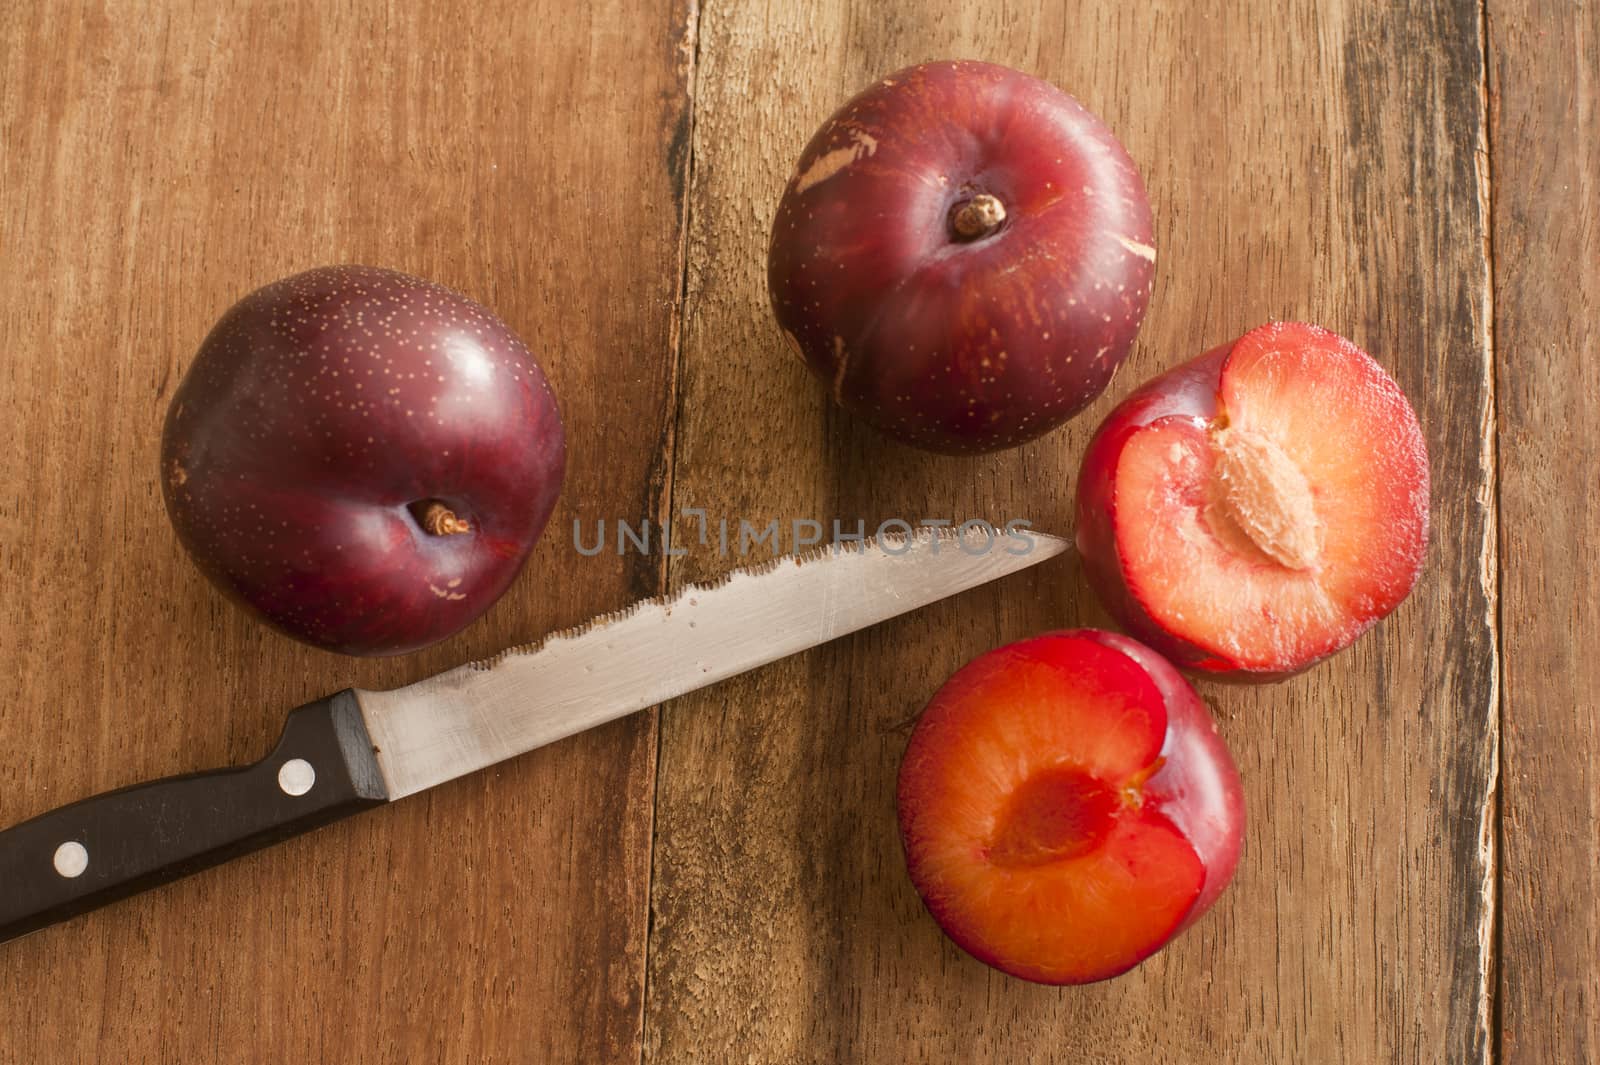 Organic Plums and Sharp Knife on Wooden Table by stockarch